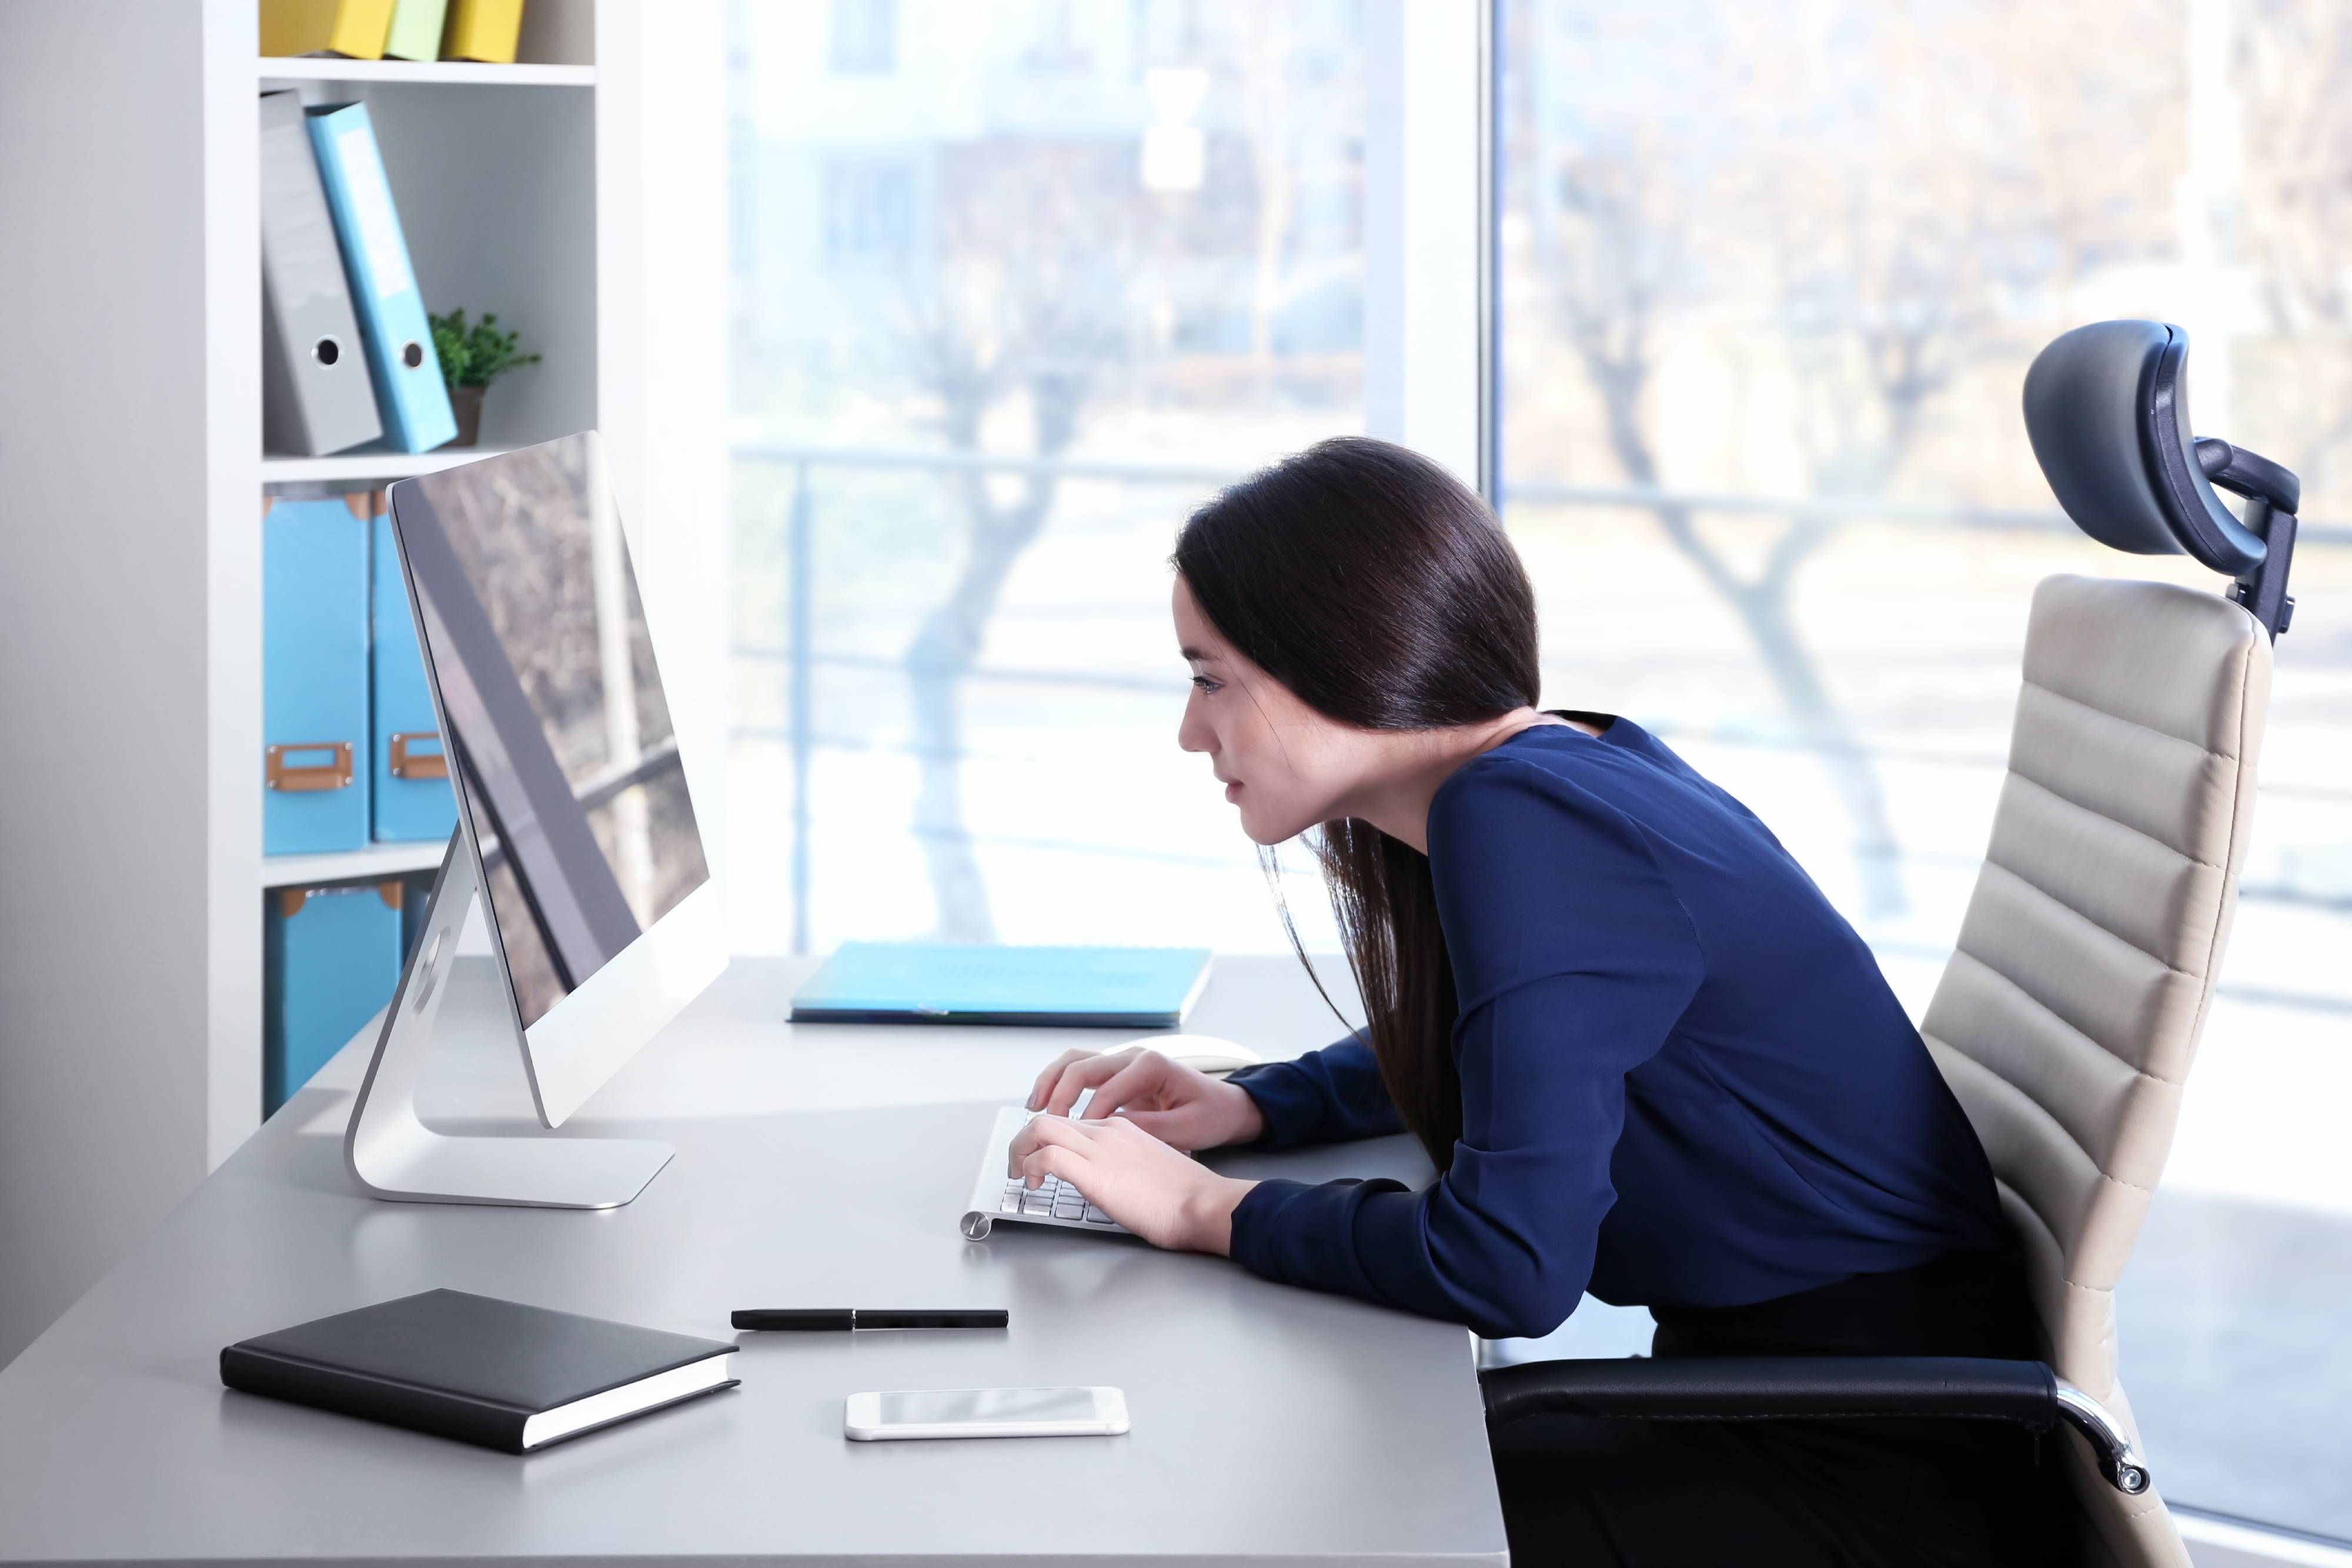 How Long Should You Stand Rather Than Sit at Your Workstation?